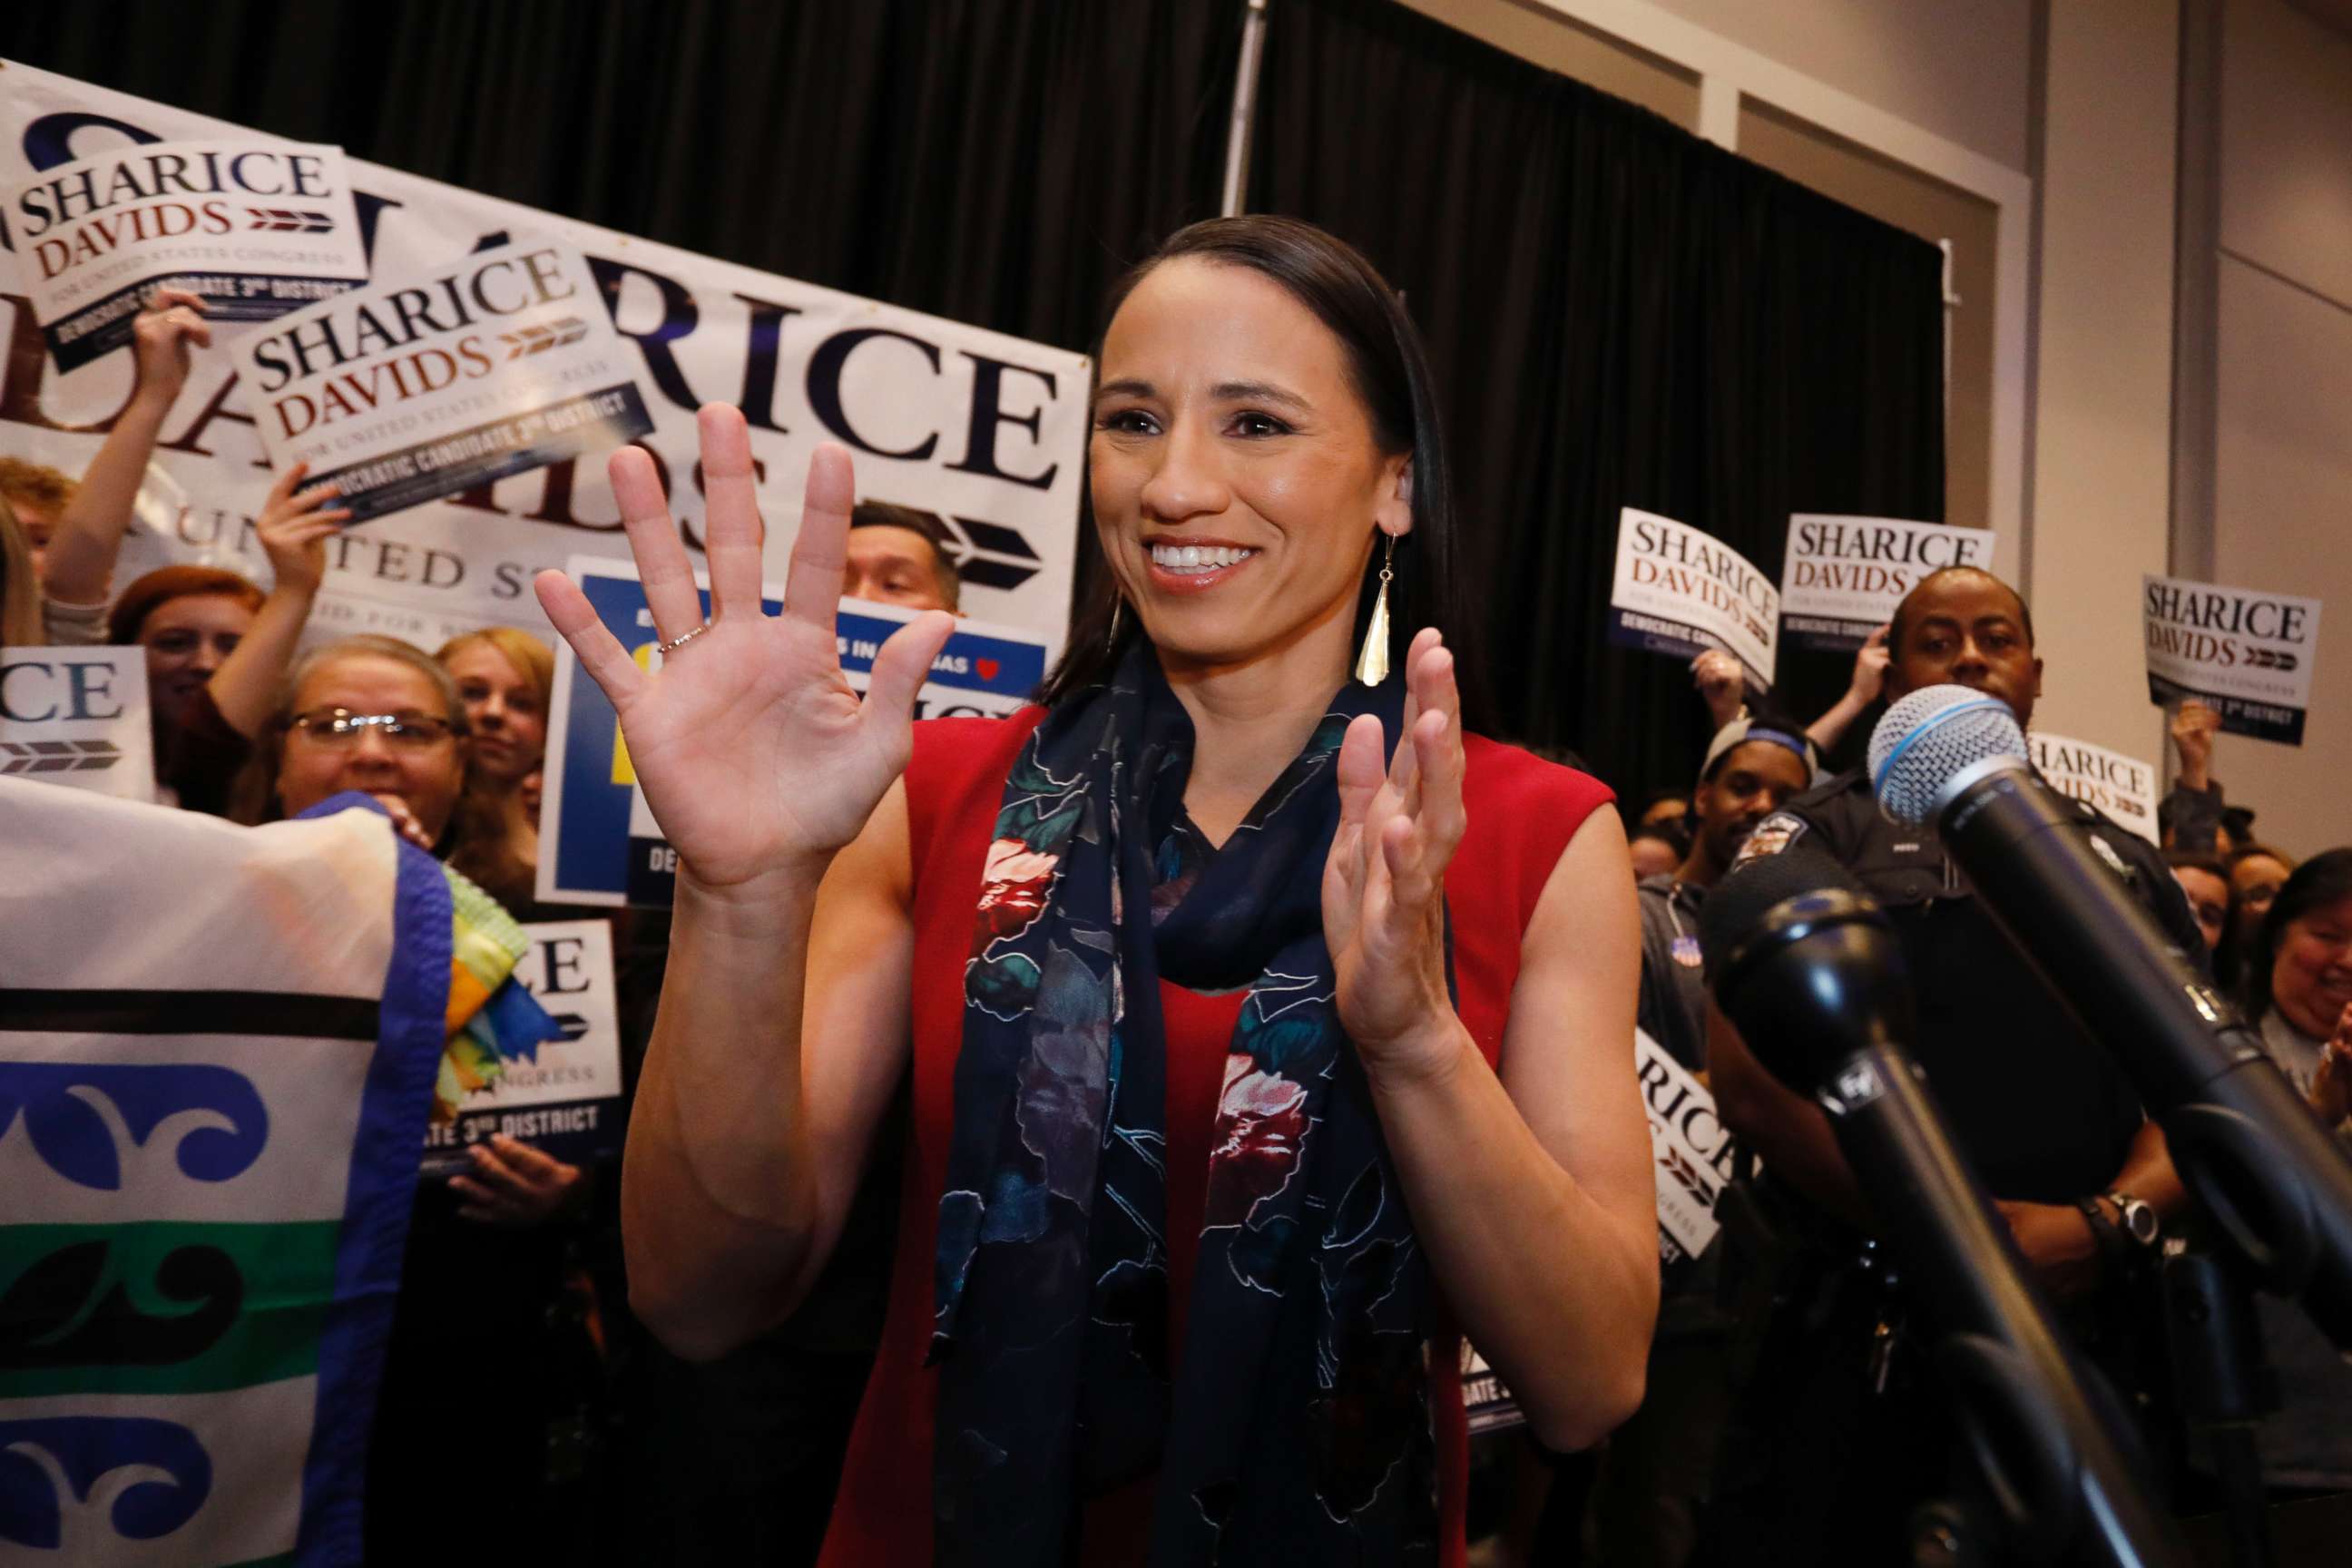 PHOTO: Democrat house candidate Sharice Davids reacts before speaking to supporters at a victory party in Olathe, Kan., Nov. 6, 2018.